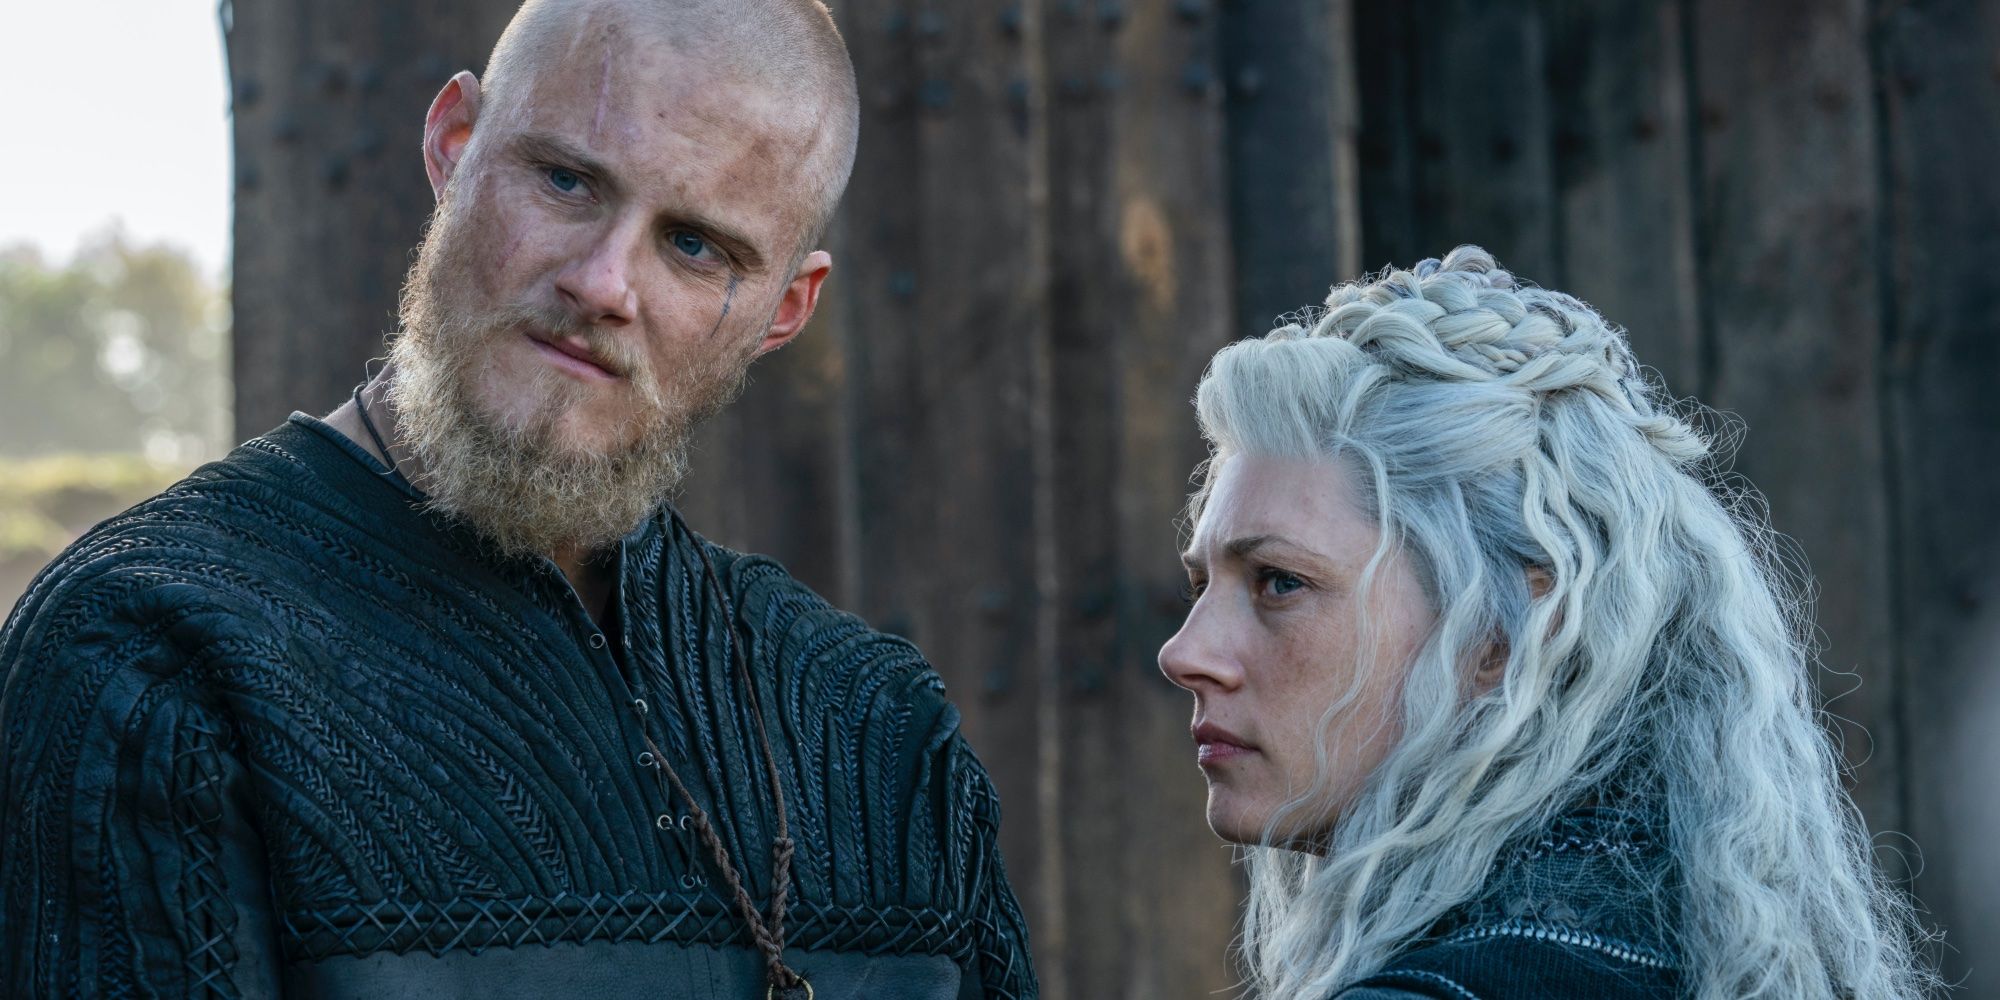 Vikings' Season 6 Episode 8 Review: Alexander Ludwig nails role of grieving  son and helpless king to perfection